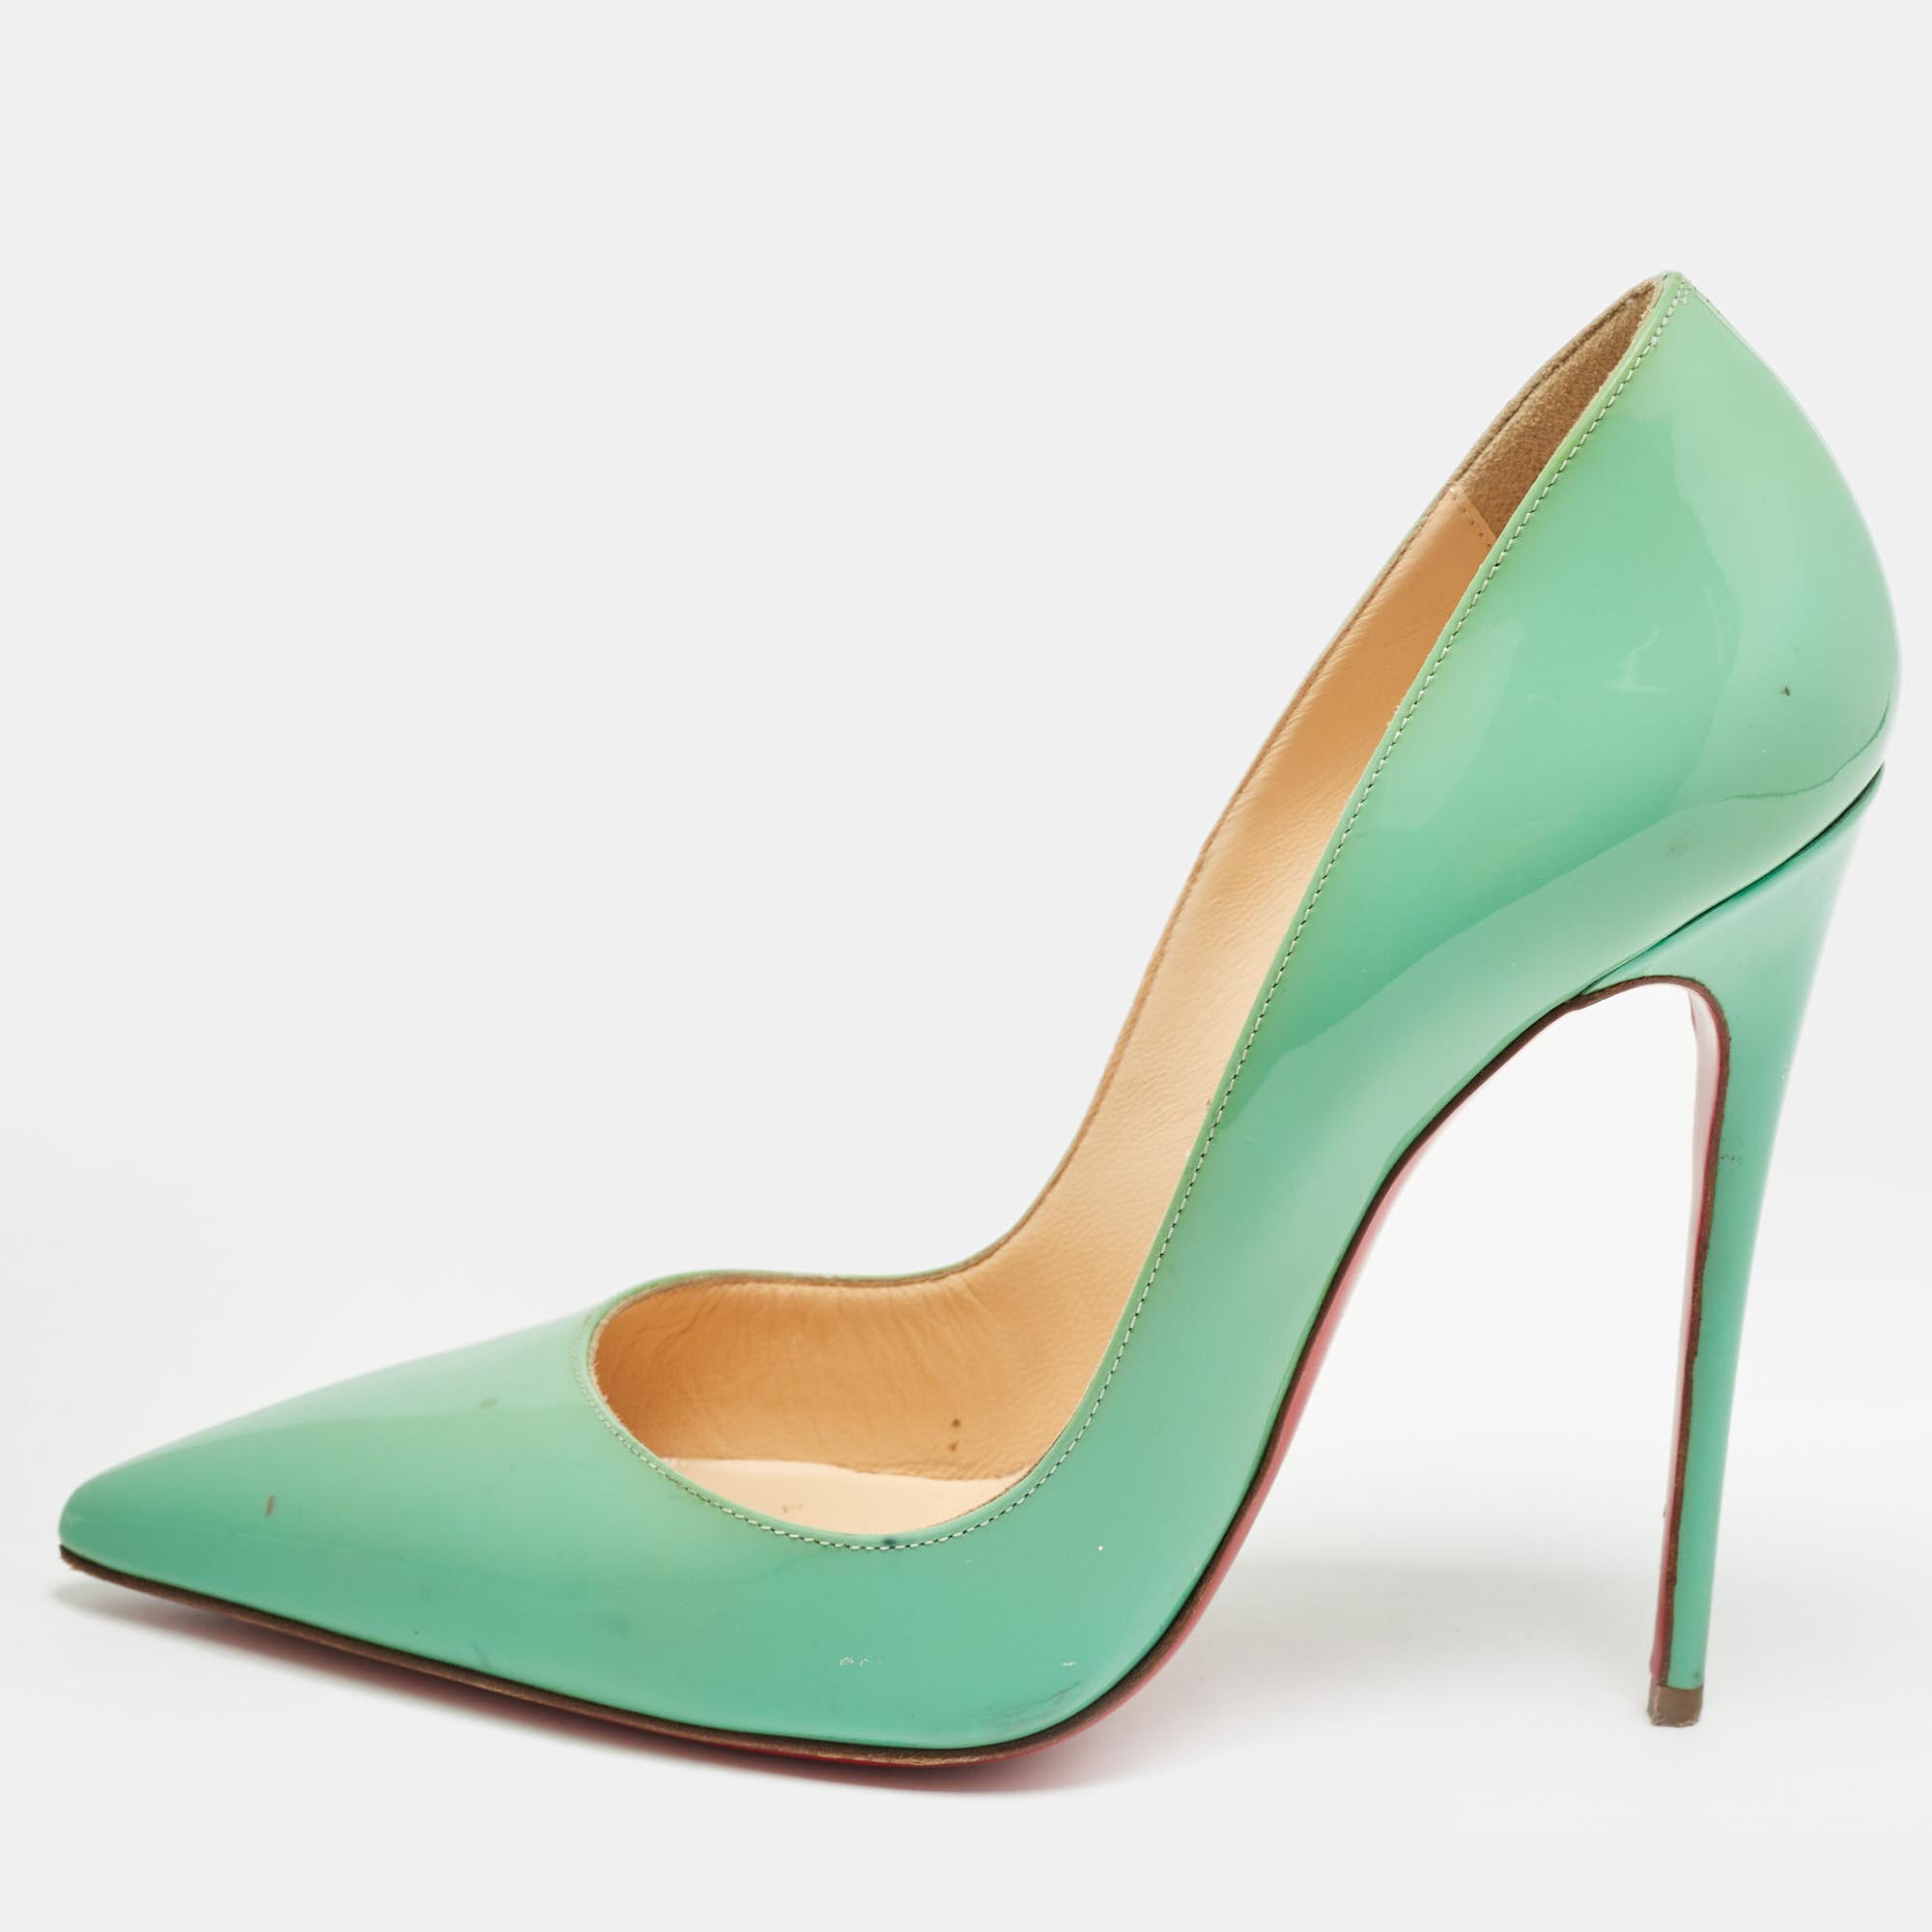 Christian louboutin green patent leather so kate pumps size 37